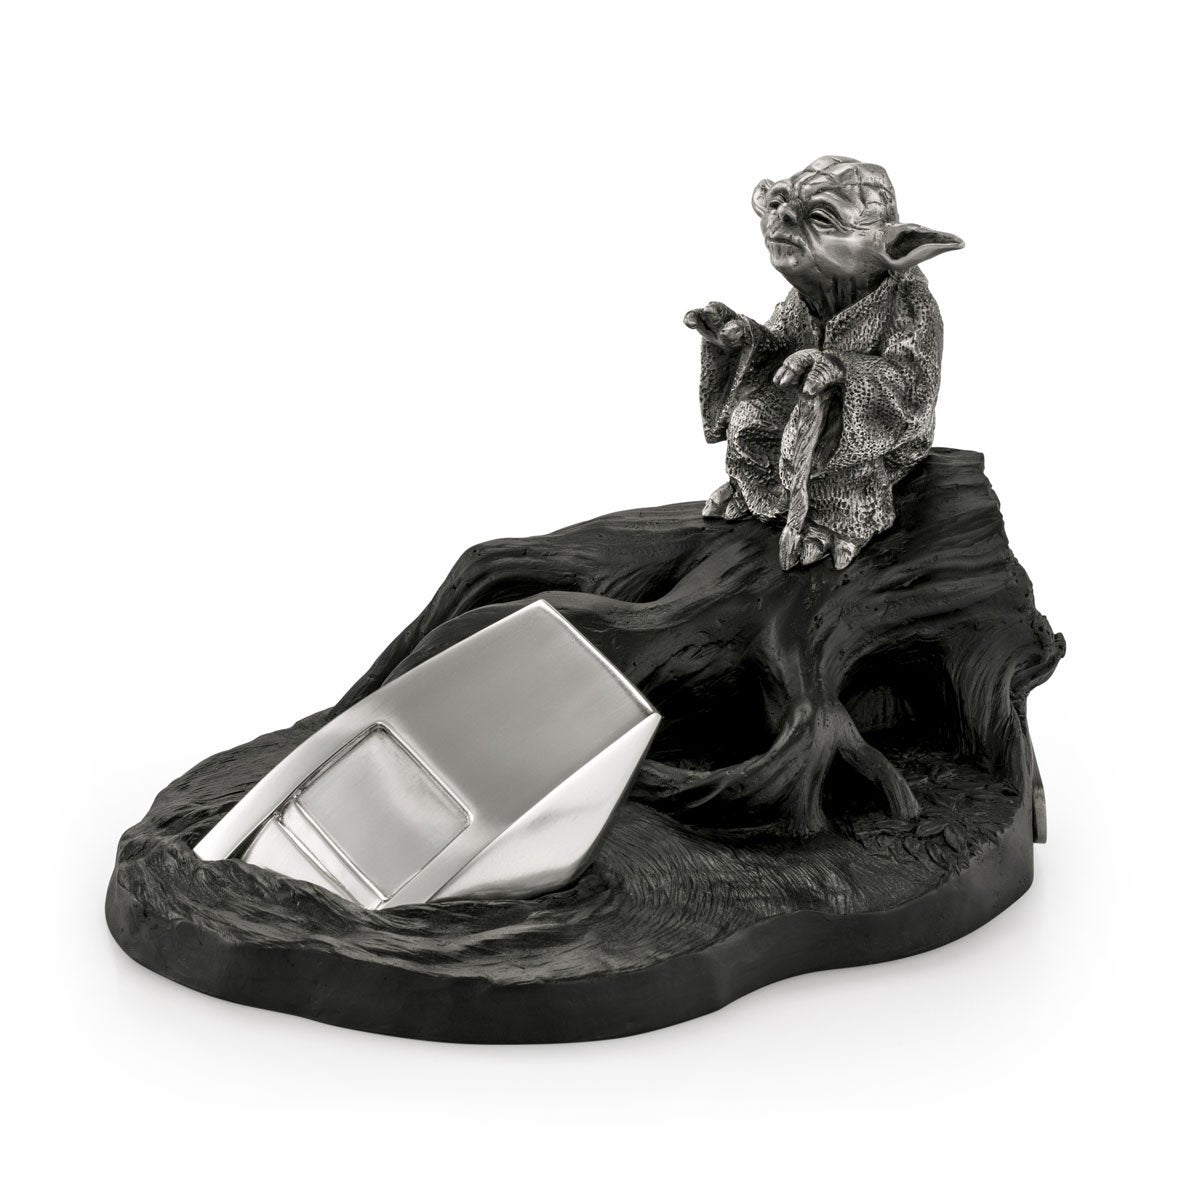  Royal Selangor Limited Edition Pewter Yoda Bust (Satin) -  Licensed Star Wars Statue/Collectible/Figurine : Home & Kitchen